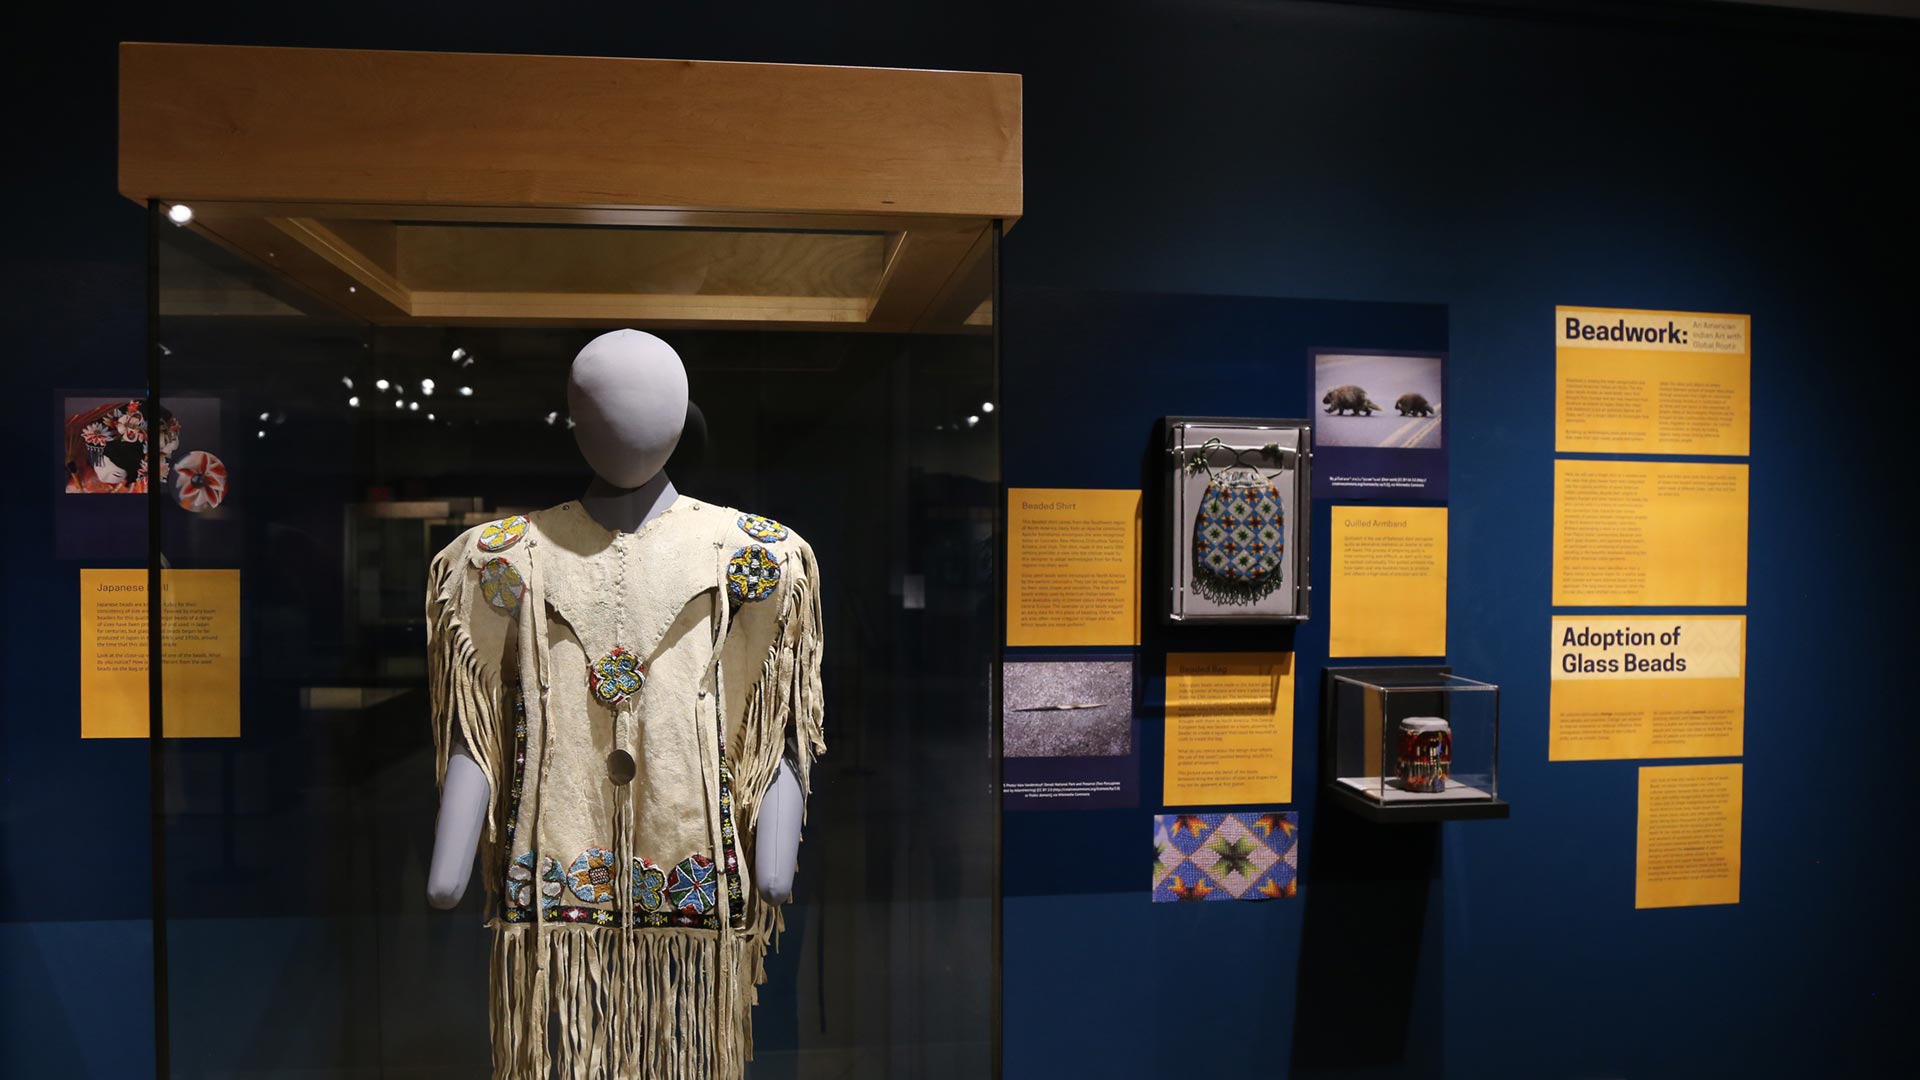 Beadwork: An American Indian Art with Global Roots overview photo